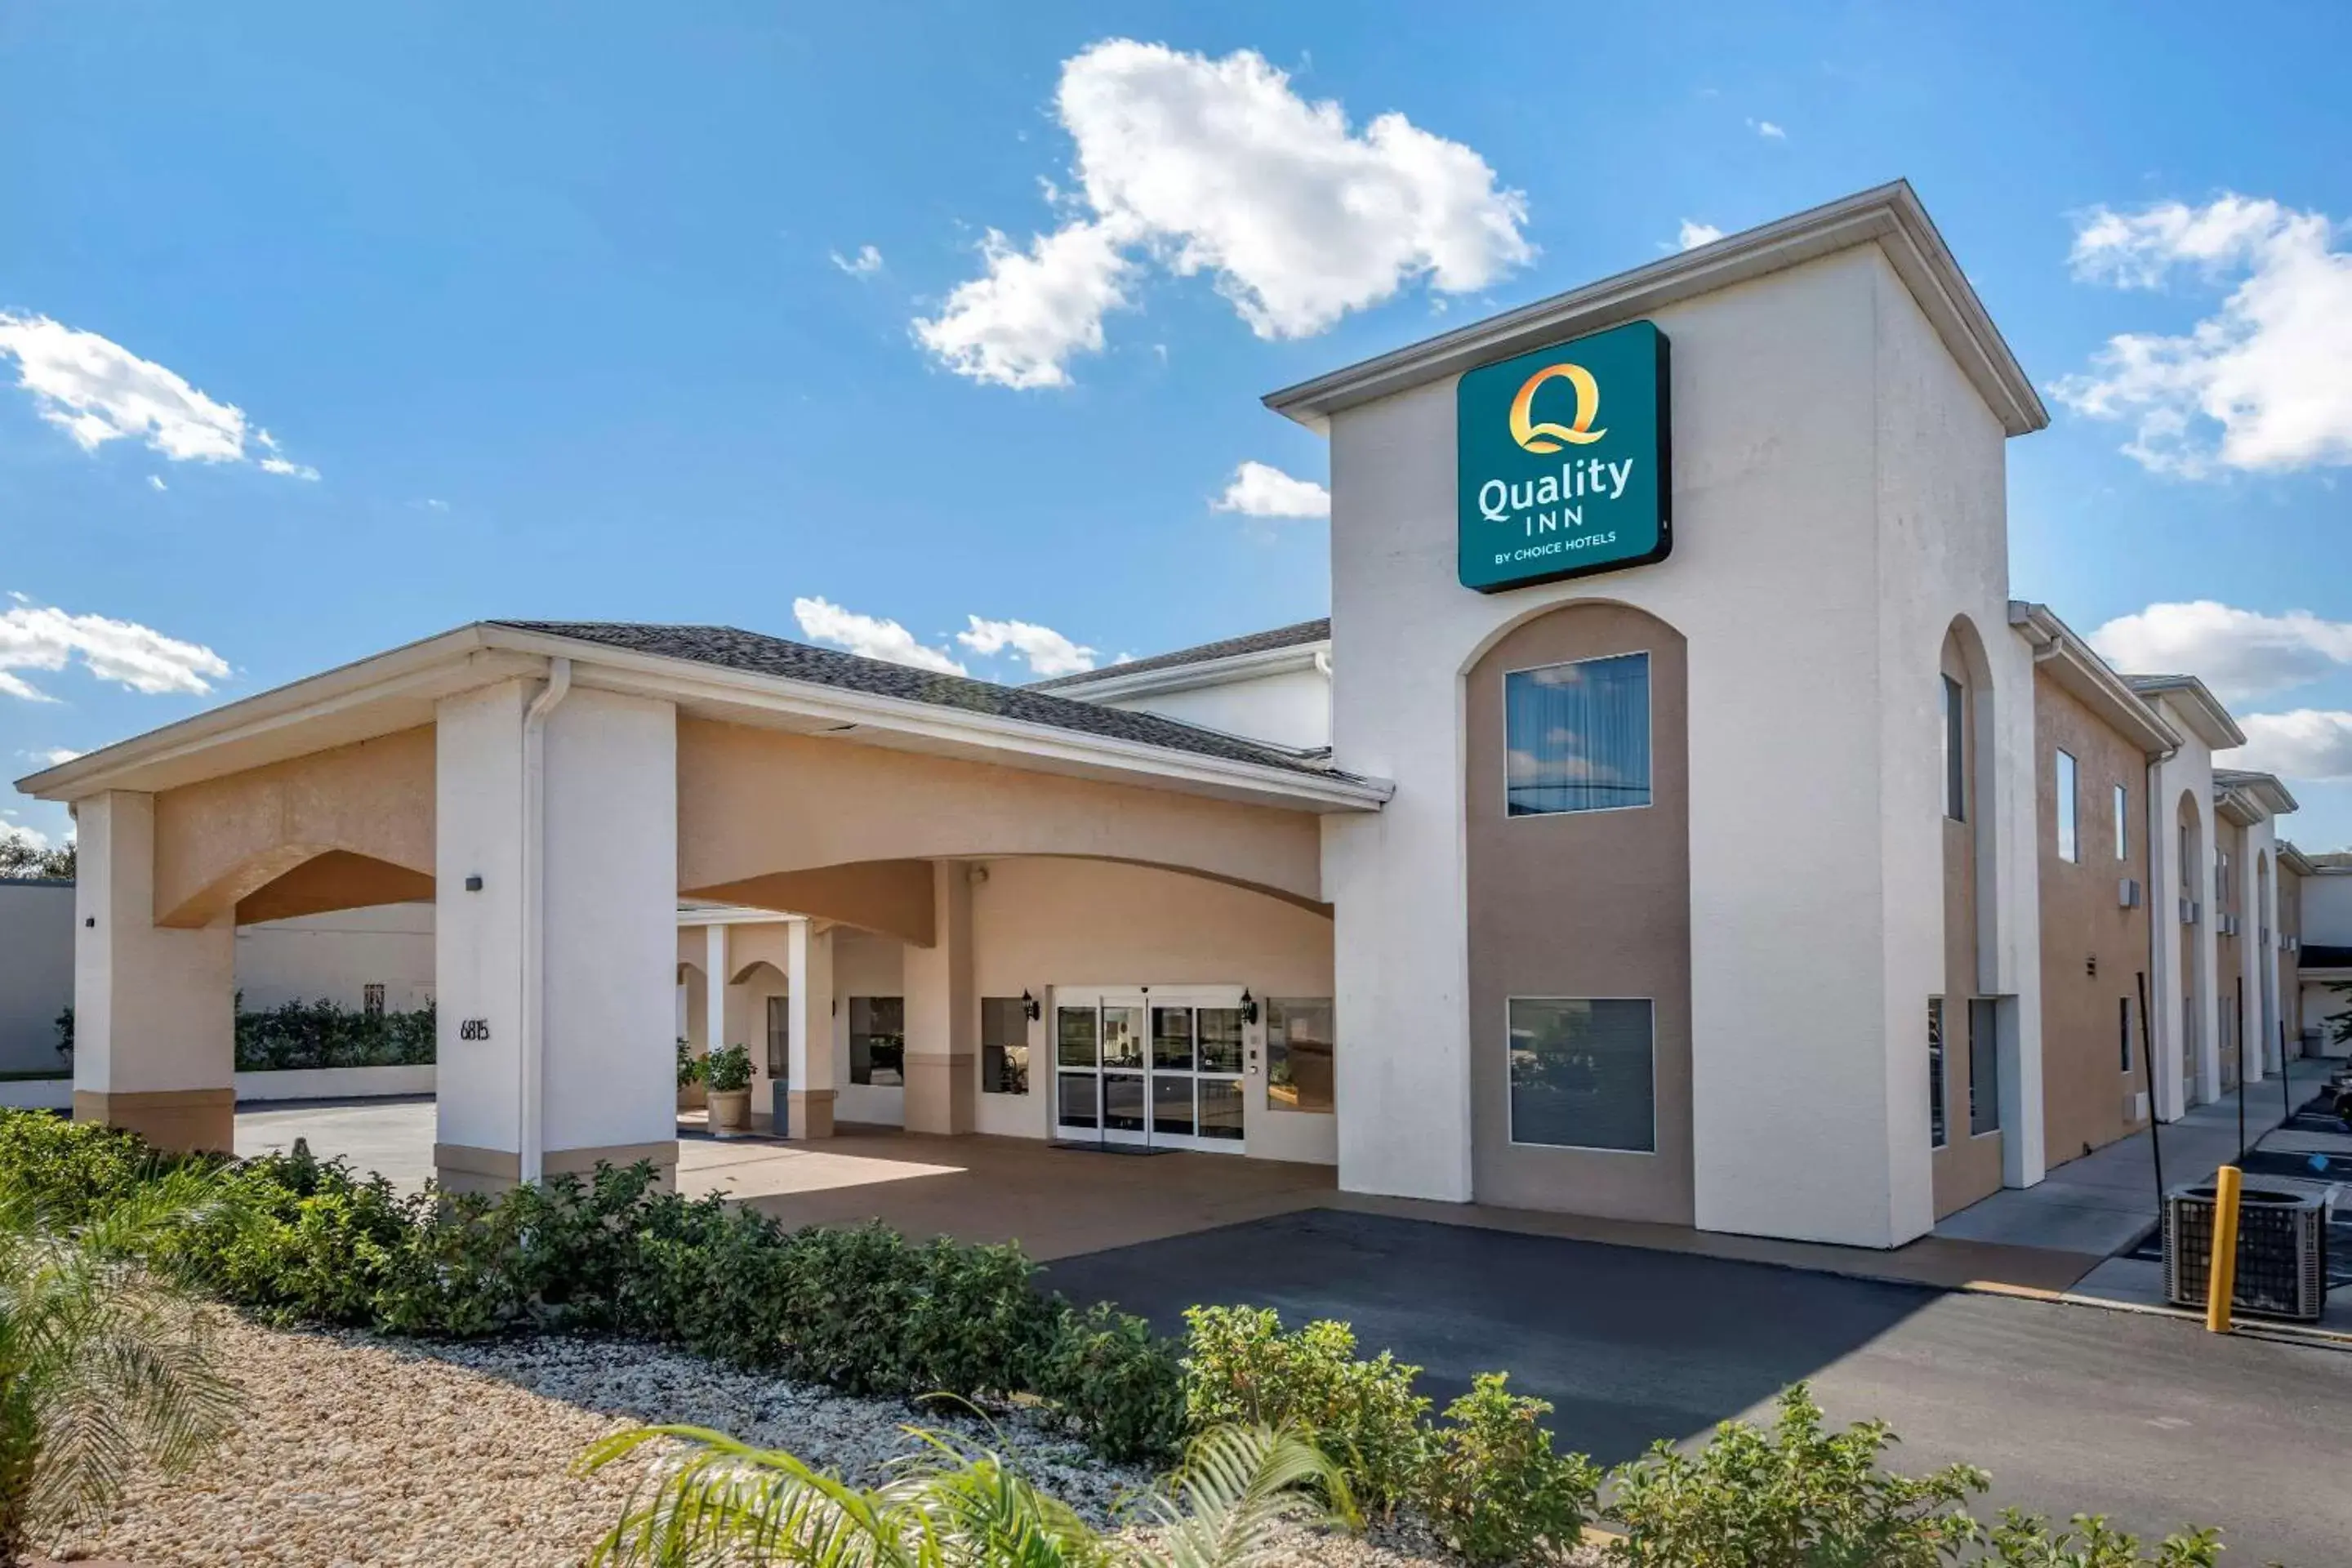 Property building in Quality Inn Zephyrhills-Dade City